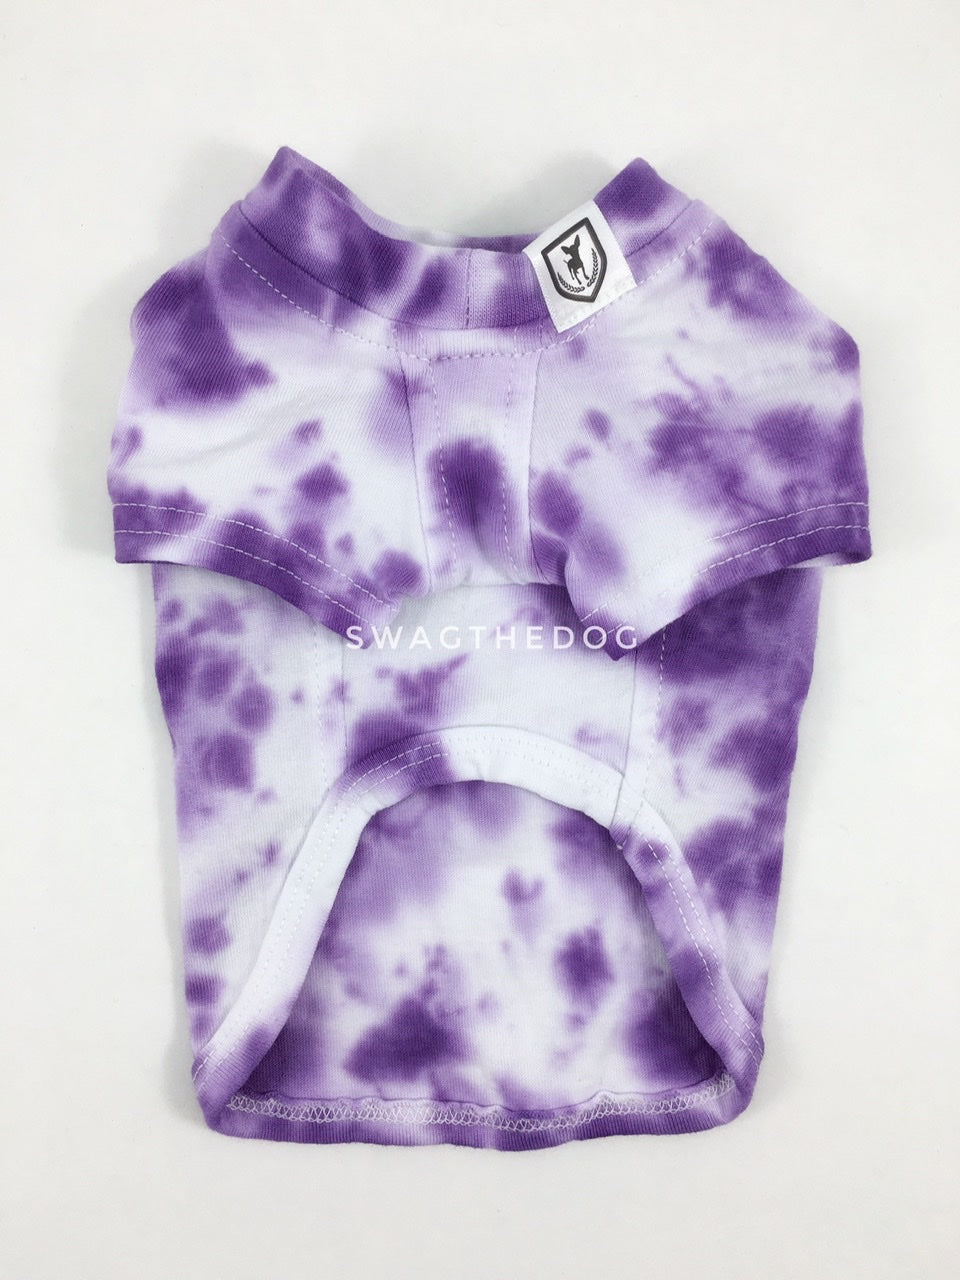 Swagadelic Purple Tie Dye Tee - Product front view. The hand tie-dyed tee with Purple